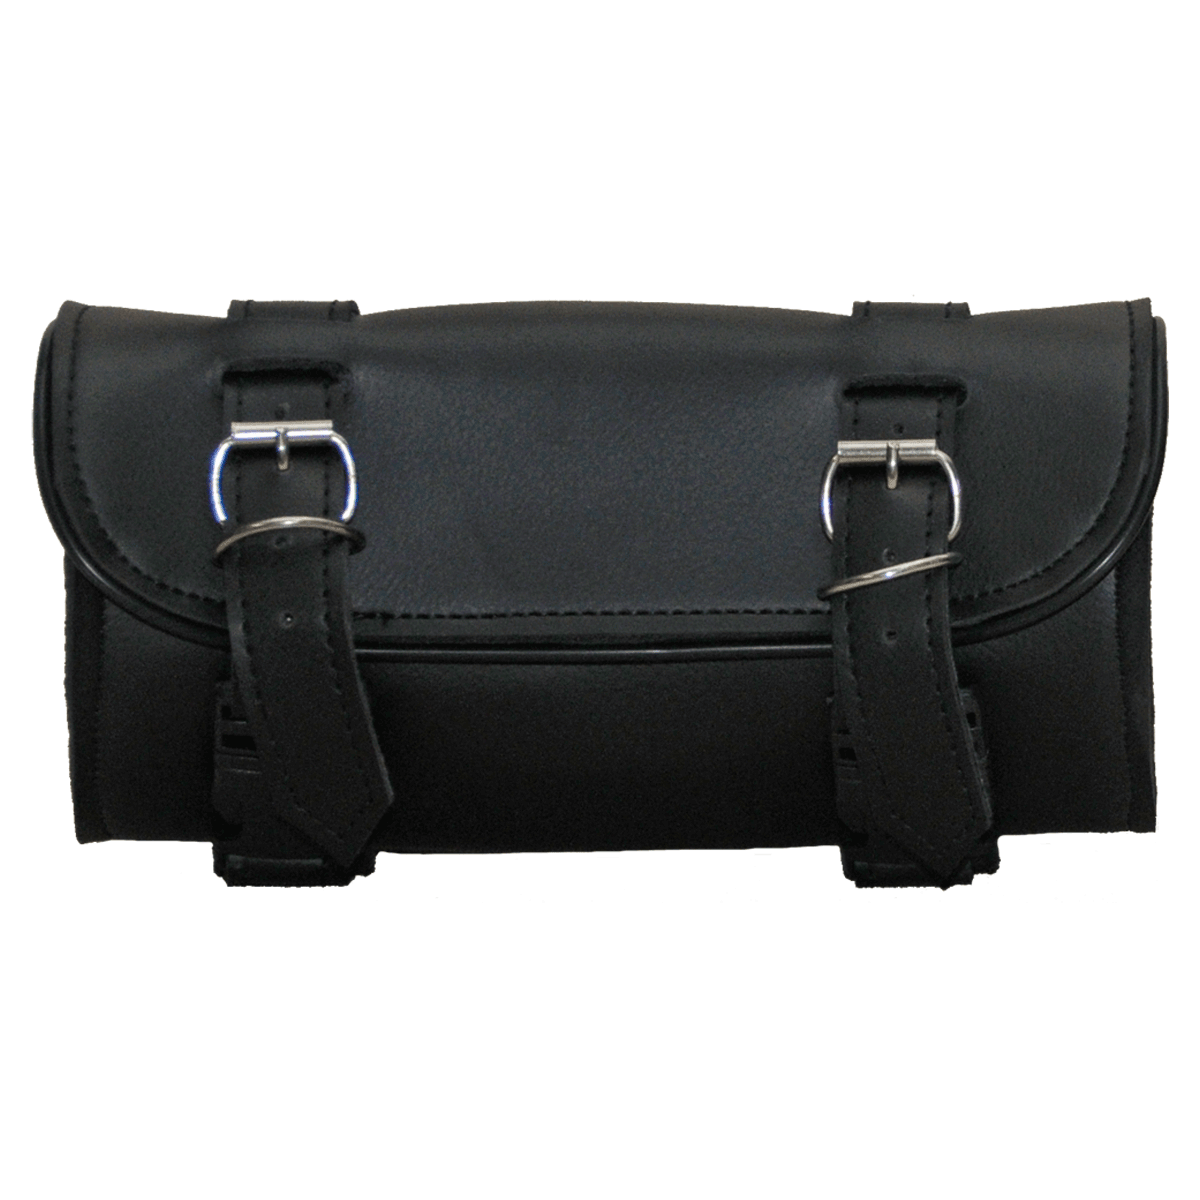 VS111H Hard Shell 2 Strap Plain Tool Bag with Quick Releases